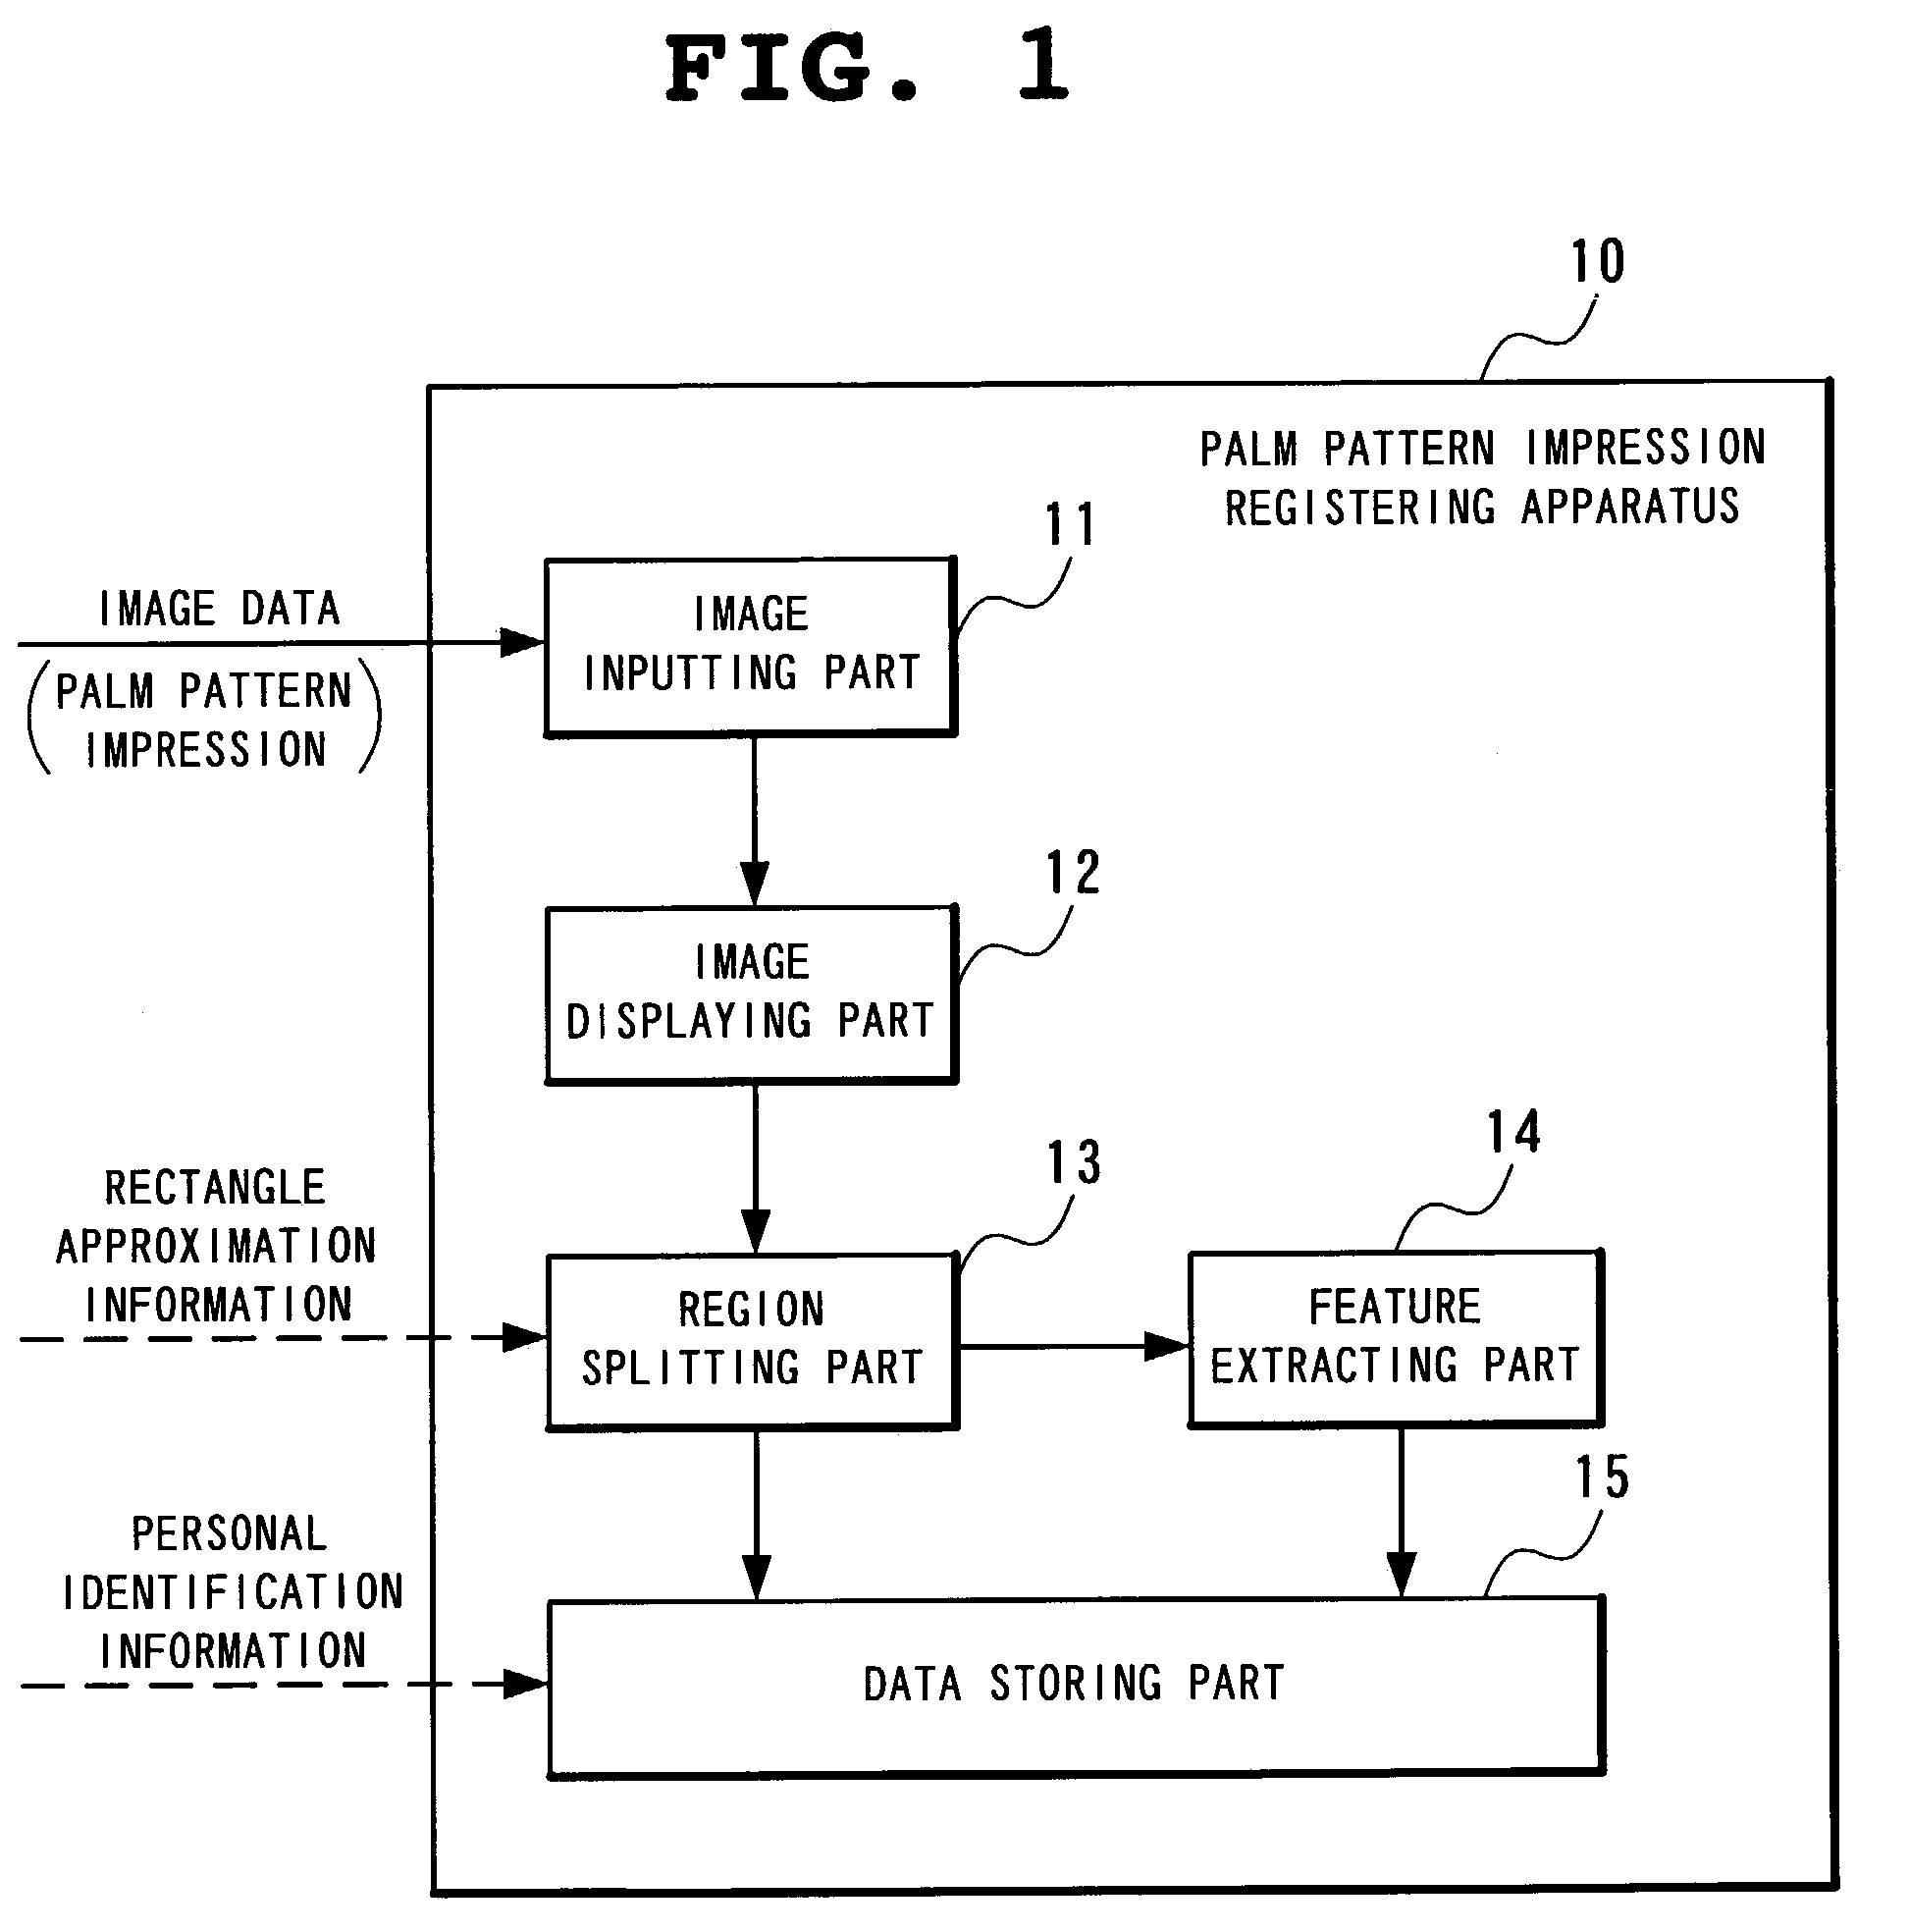 Method and apparatus for registering palm pattern impression